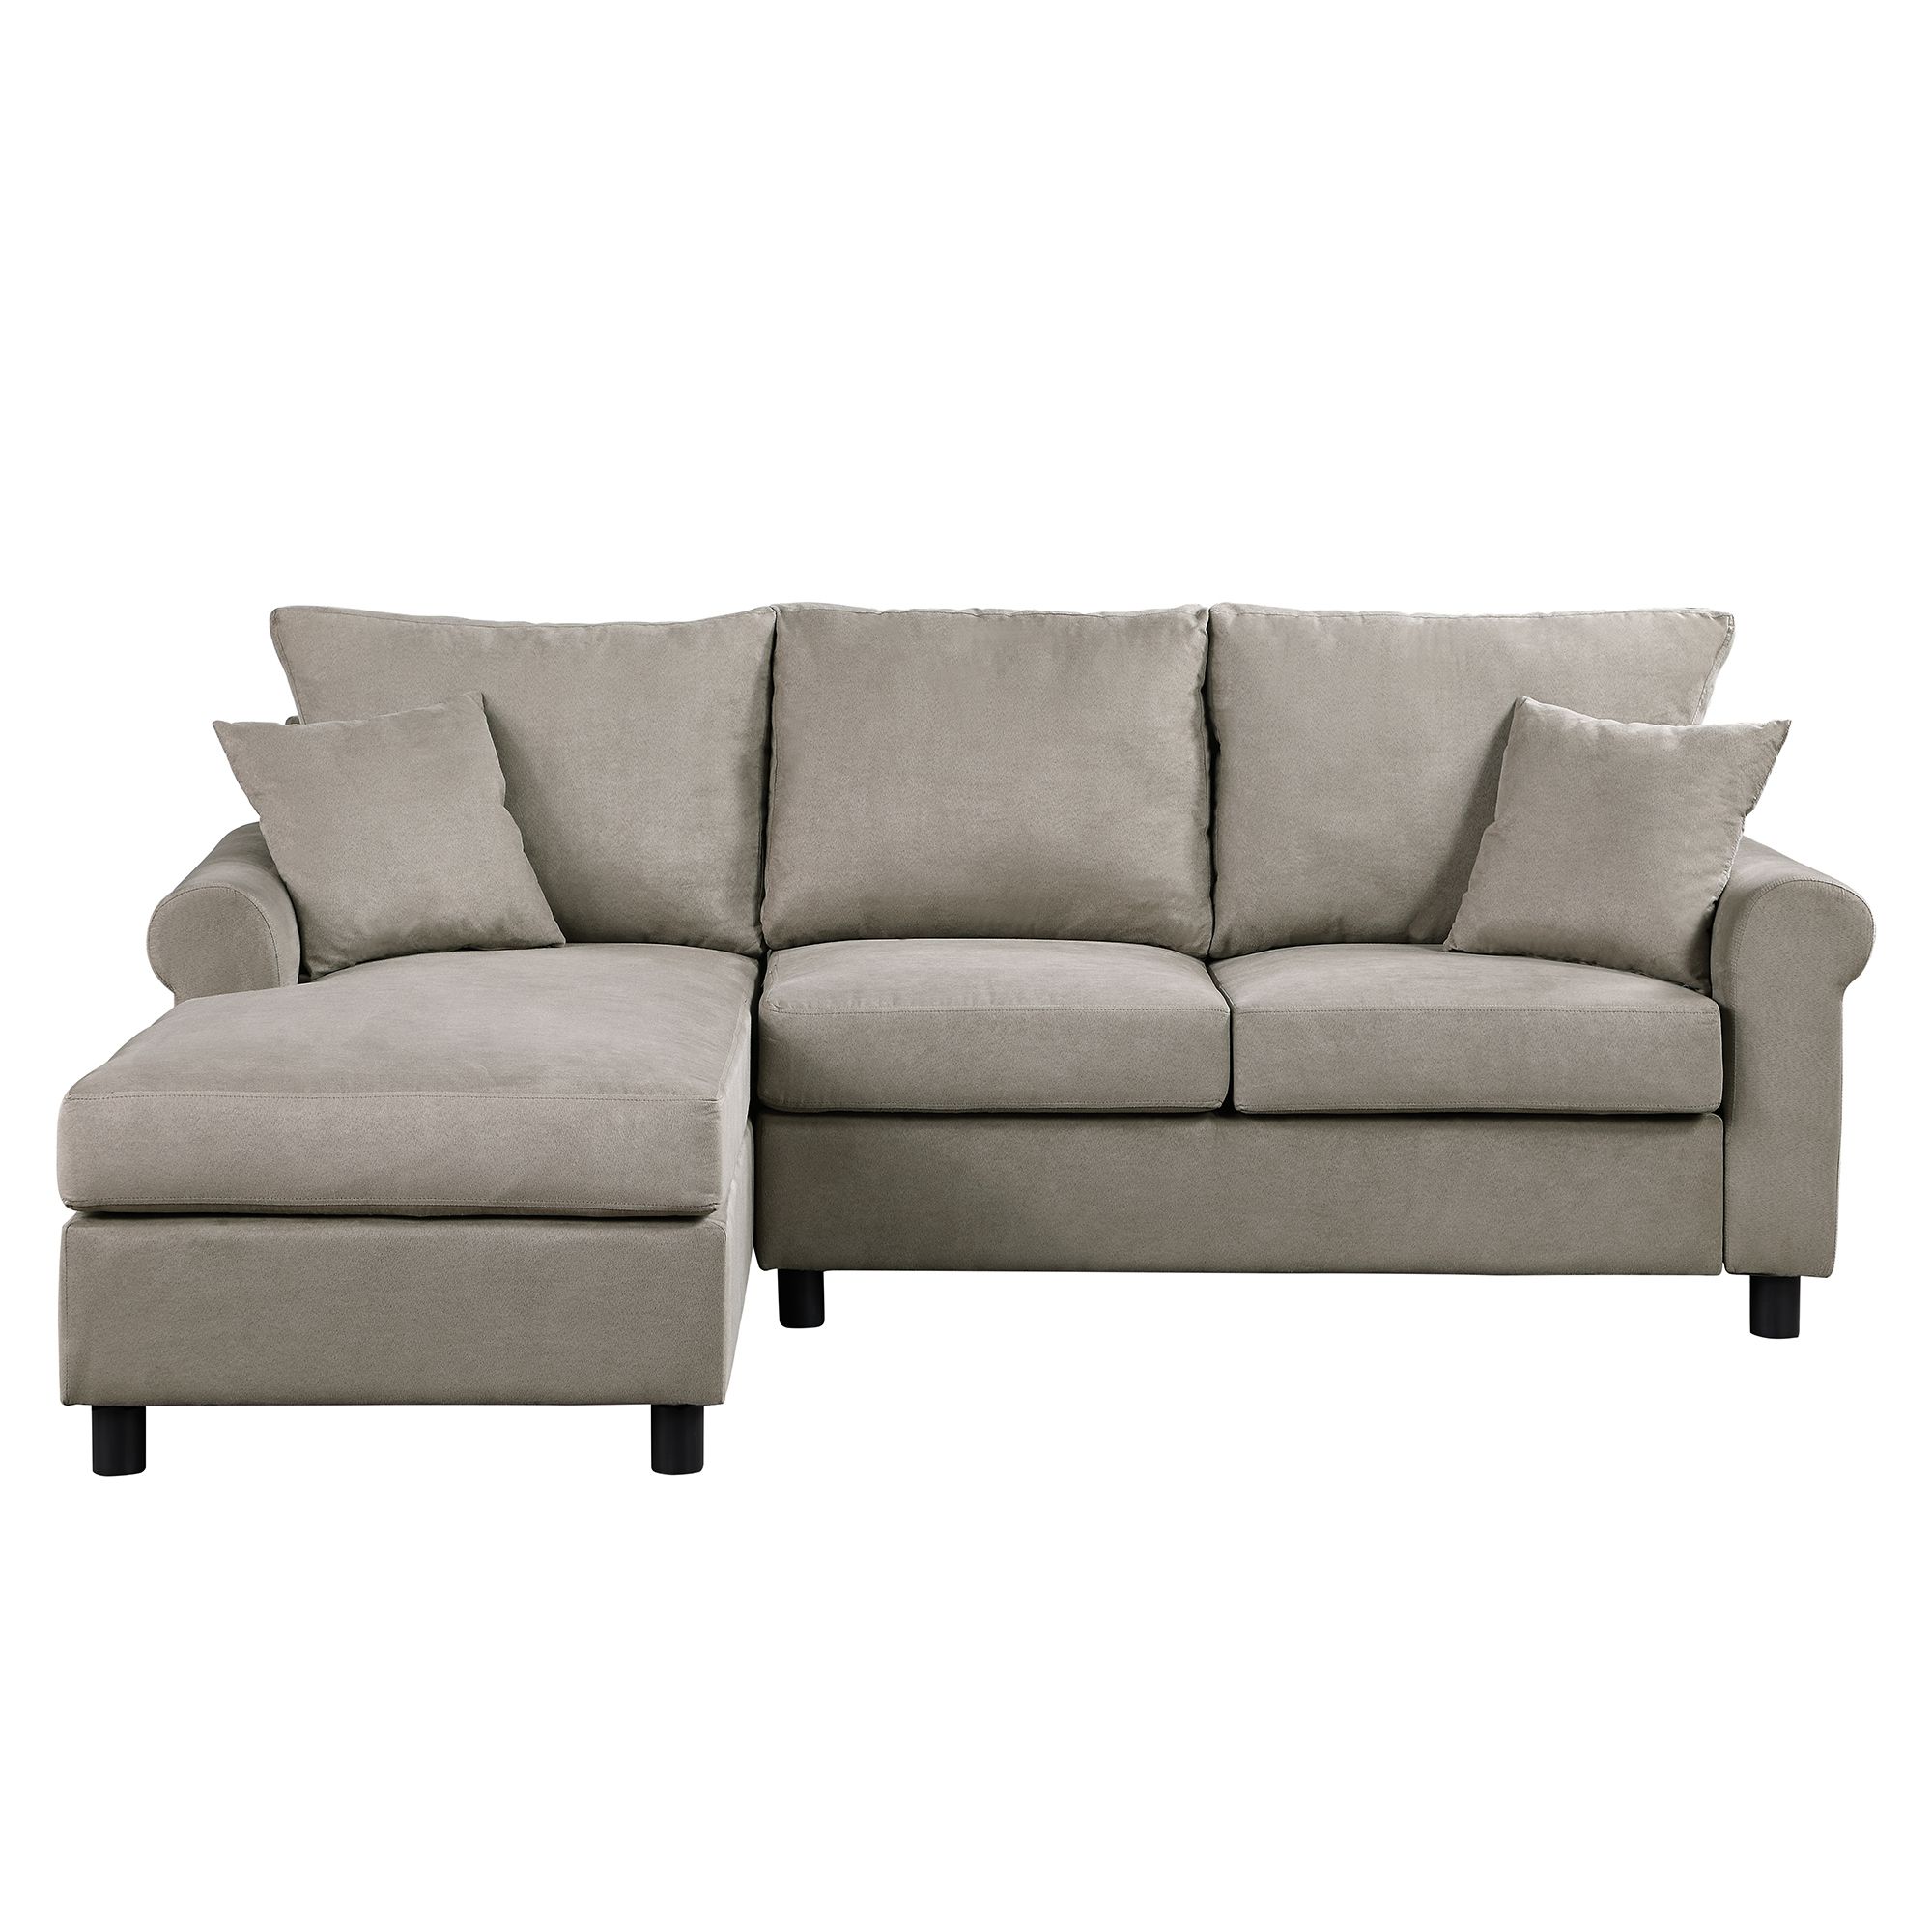 Sectional Sofa, Segmart 35'' X 85'' X 61'' Tufted Pertaining To Verona Mid Century Reversible Sectional Sofas (View 8 of 15)